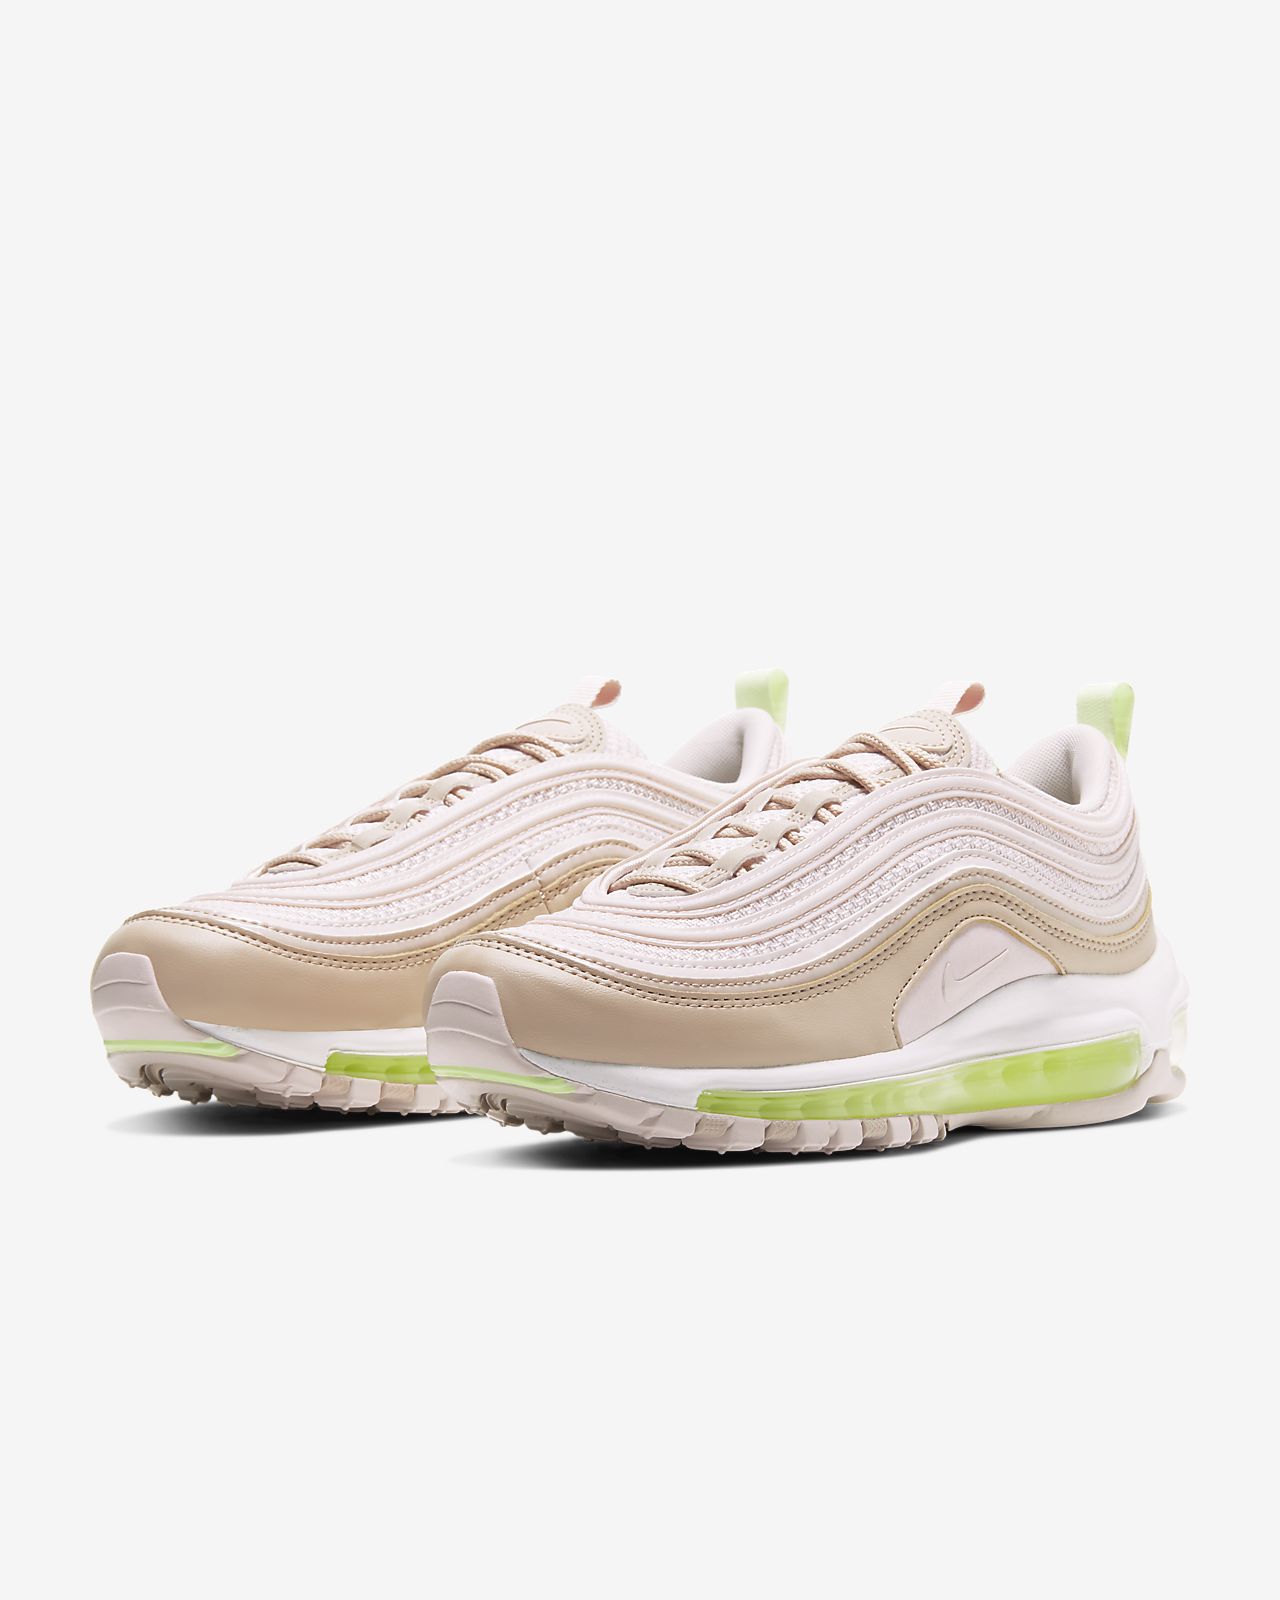 air max 97 barely rose Shop Clothing 